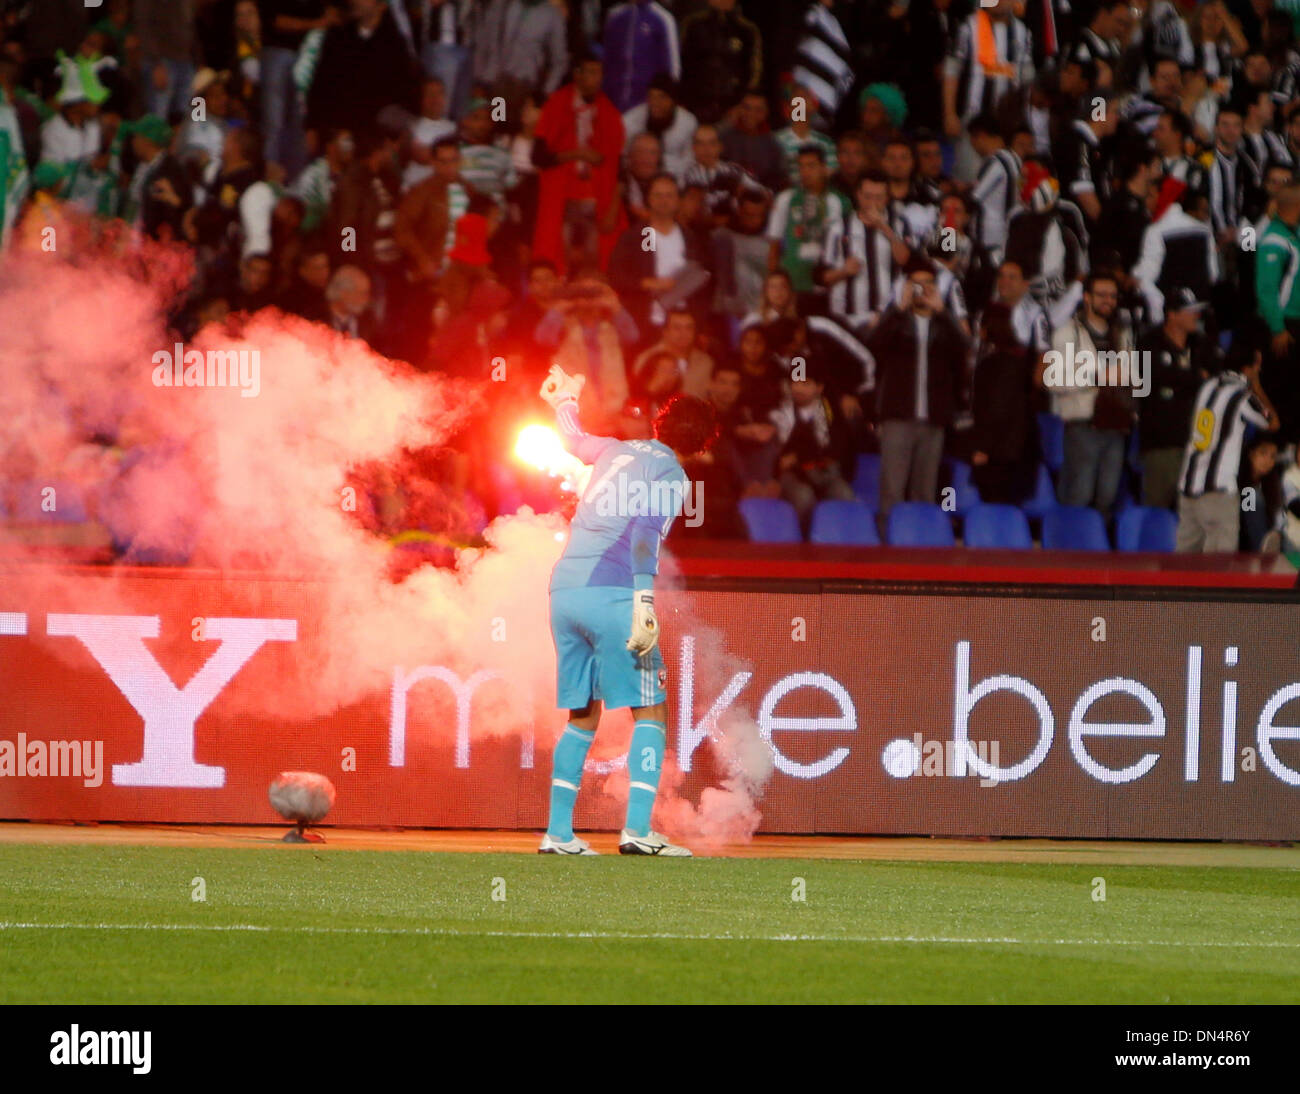 Marrakech , Morocco. 18th Dec, 2013. the goalkeeper Sherif EKRAMY throws a firework off the pitch during the FIFA Club World Cup 5th Place game between Al Ahly SC and CF Monterrey from the Marrakech Stadium. Credit:  Action Plus Sports/Alamy Live News Stock Photo